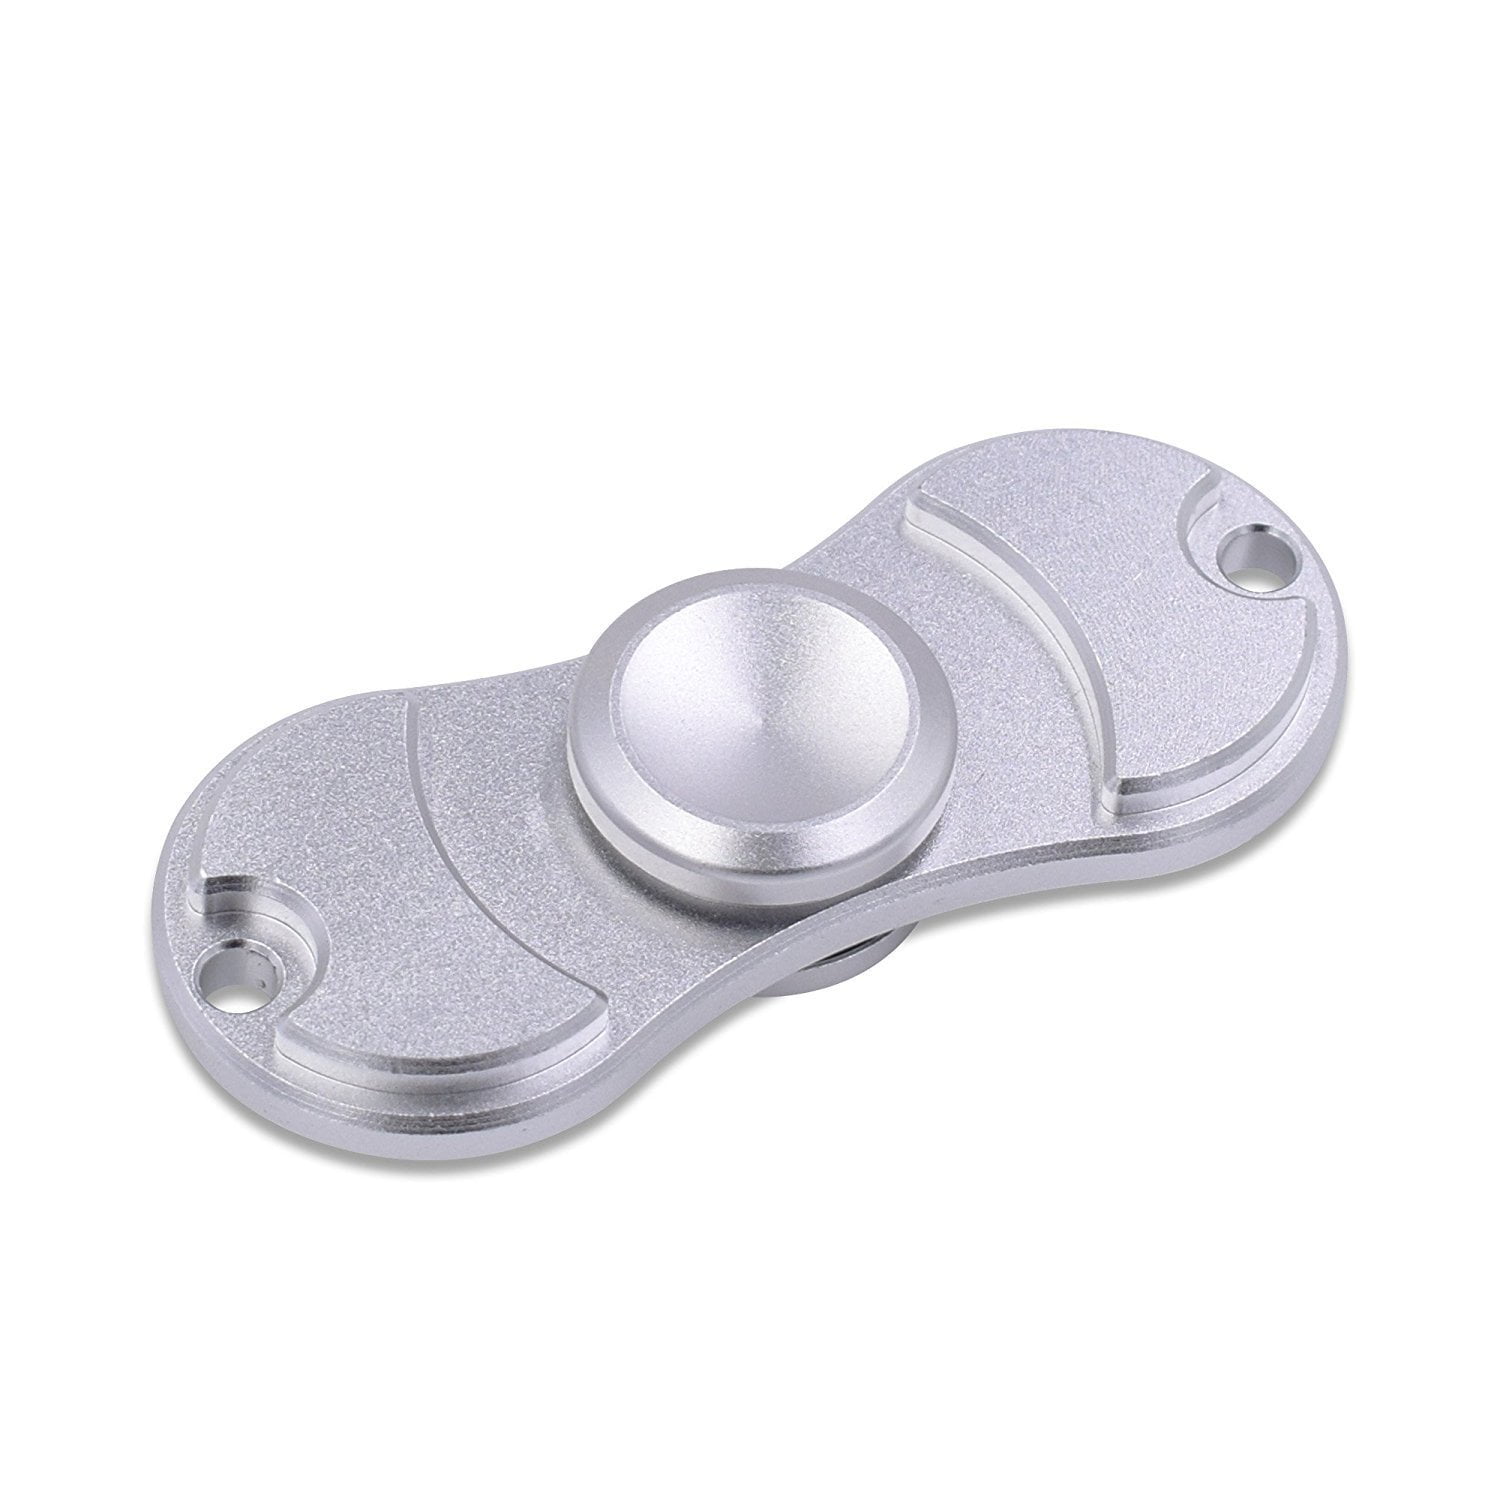 Details about   Black Silver Fidget Spinner Toy Boys Girls Adults Kids ADHD Focus Stress Metal 